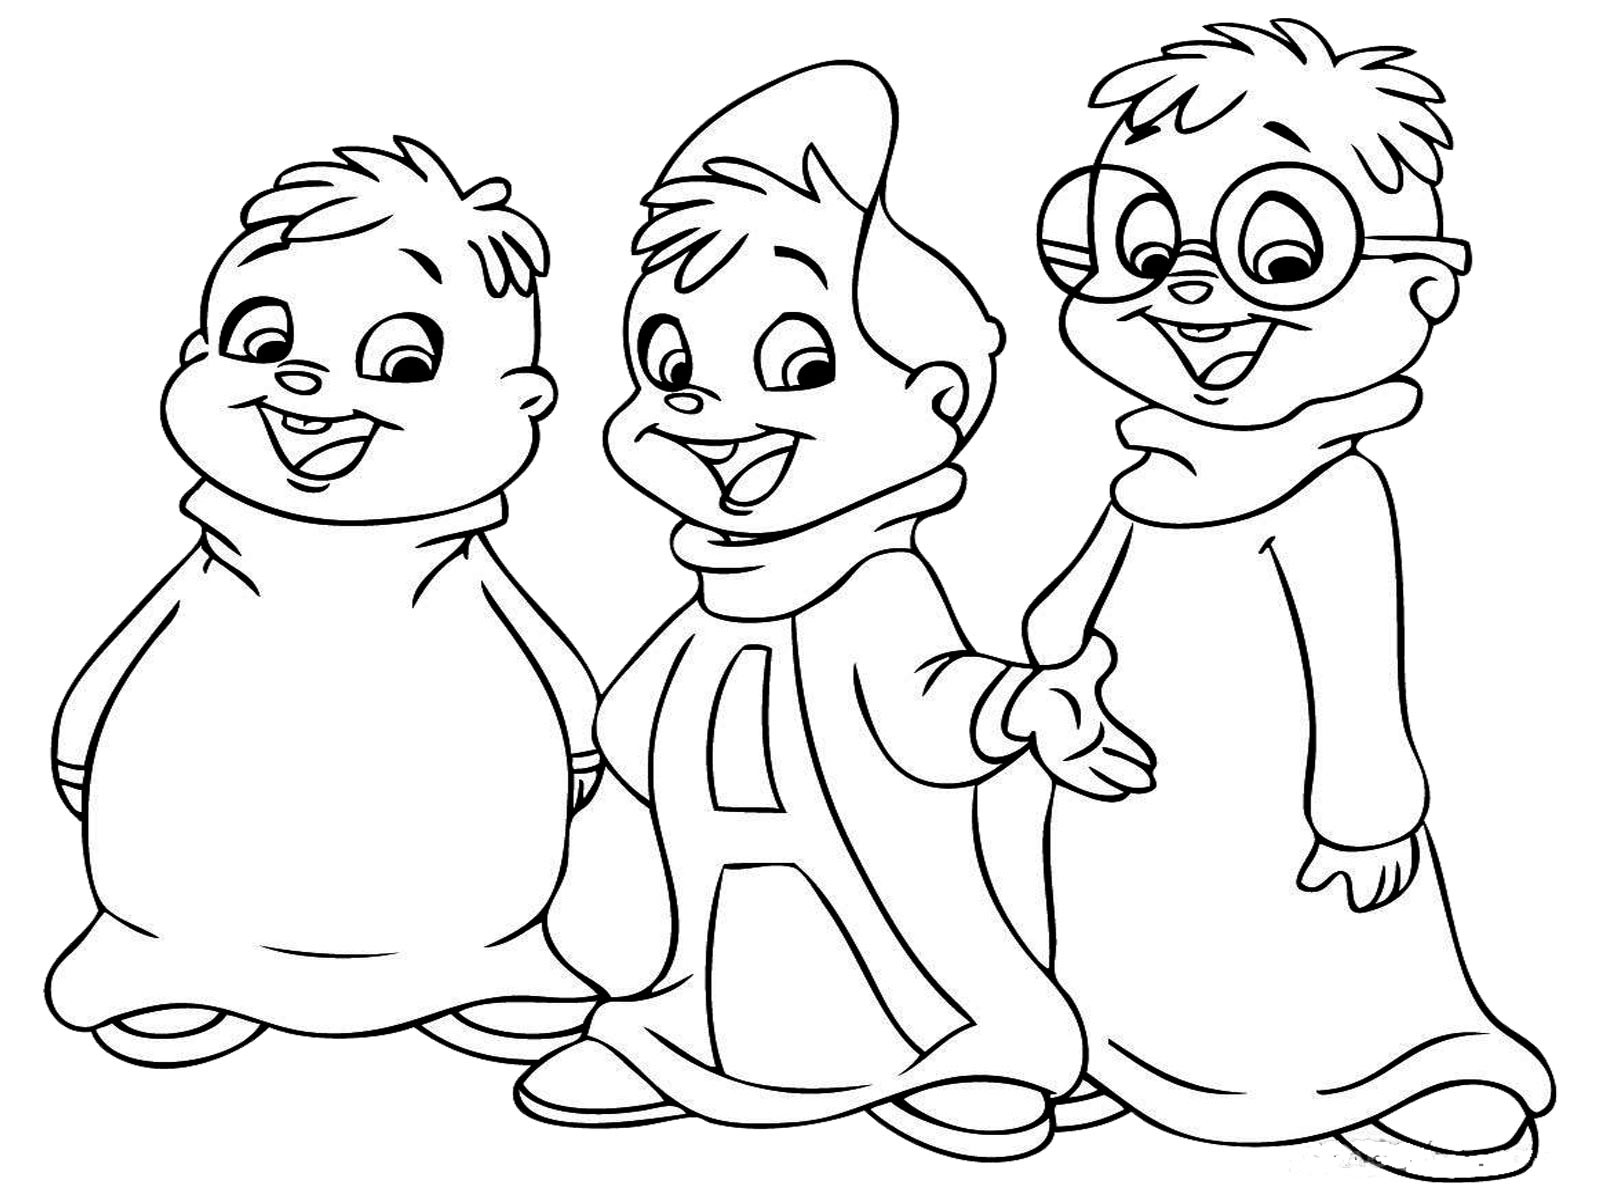 Coloring Pages Printable For Boys
 Coloring Pages for Boys 2018 Dr Odd